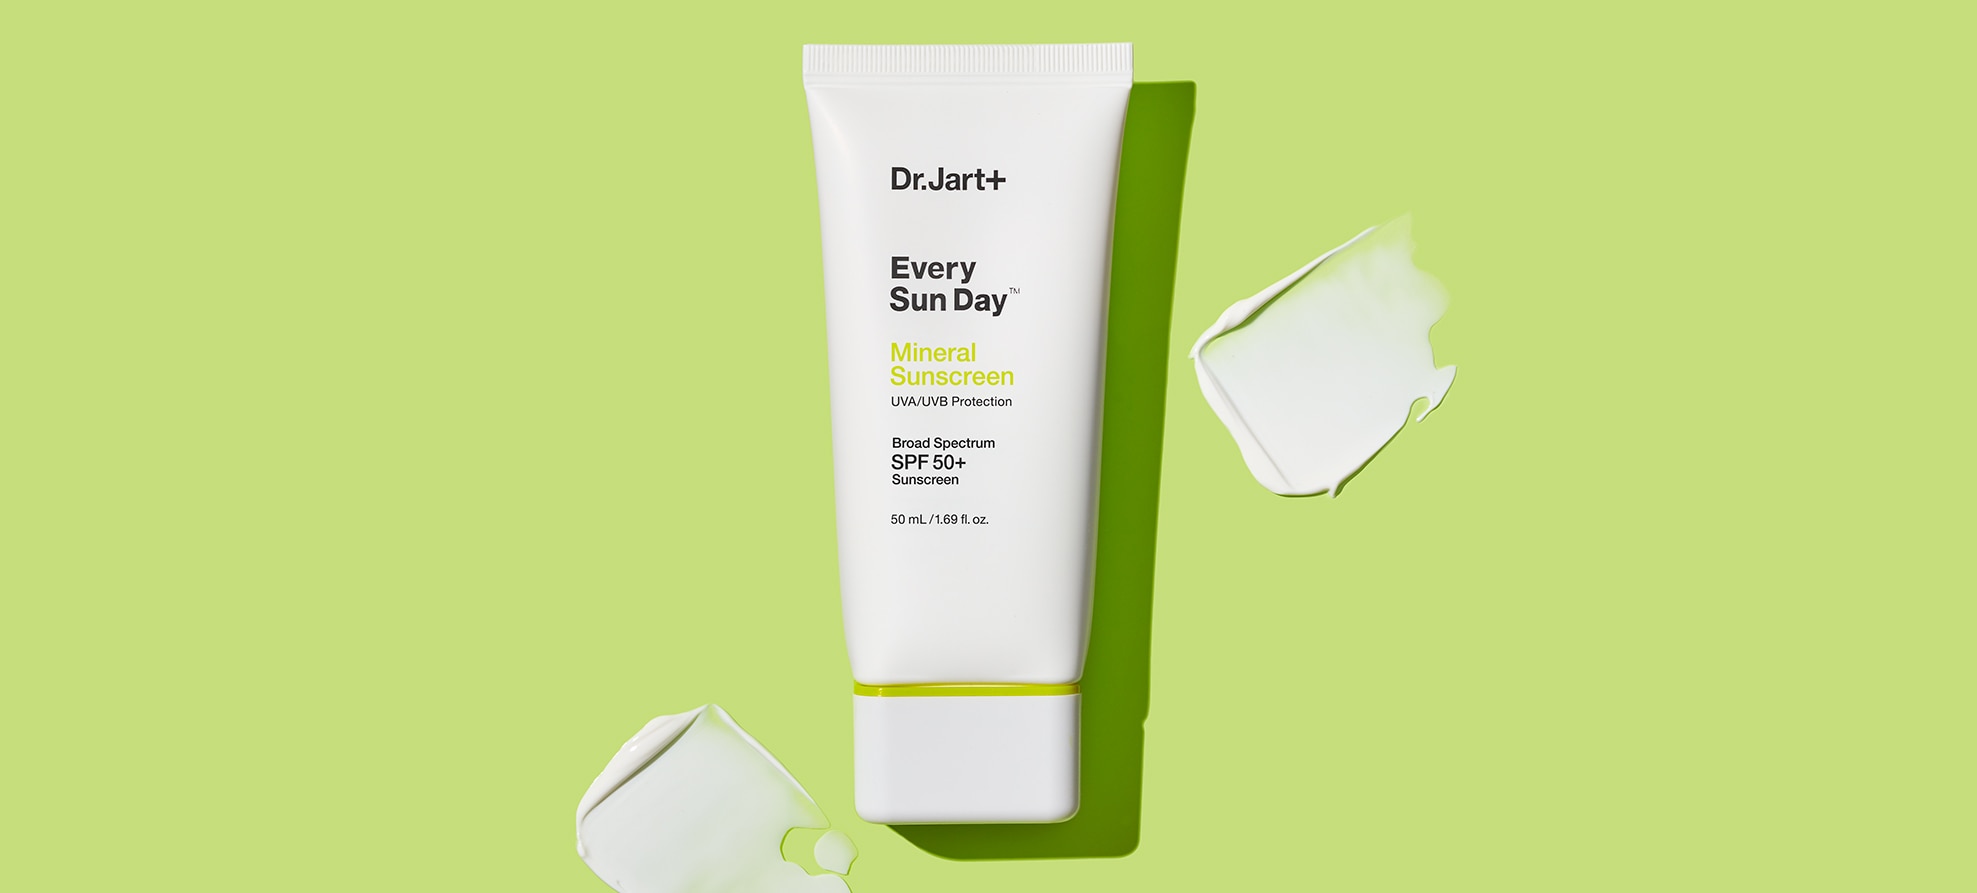 Every Sun Day Mineral Sunscreen bottle with dollops of creamy sunscreen texture